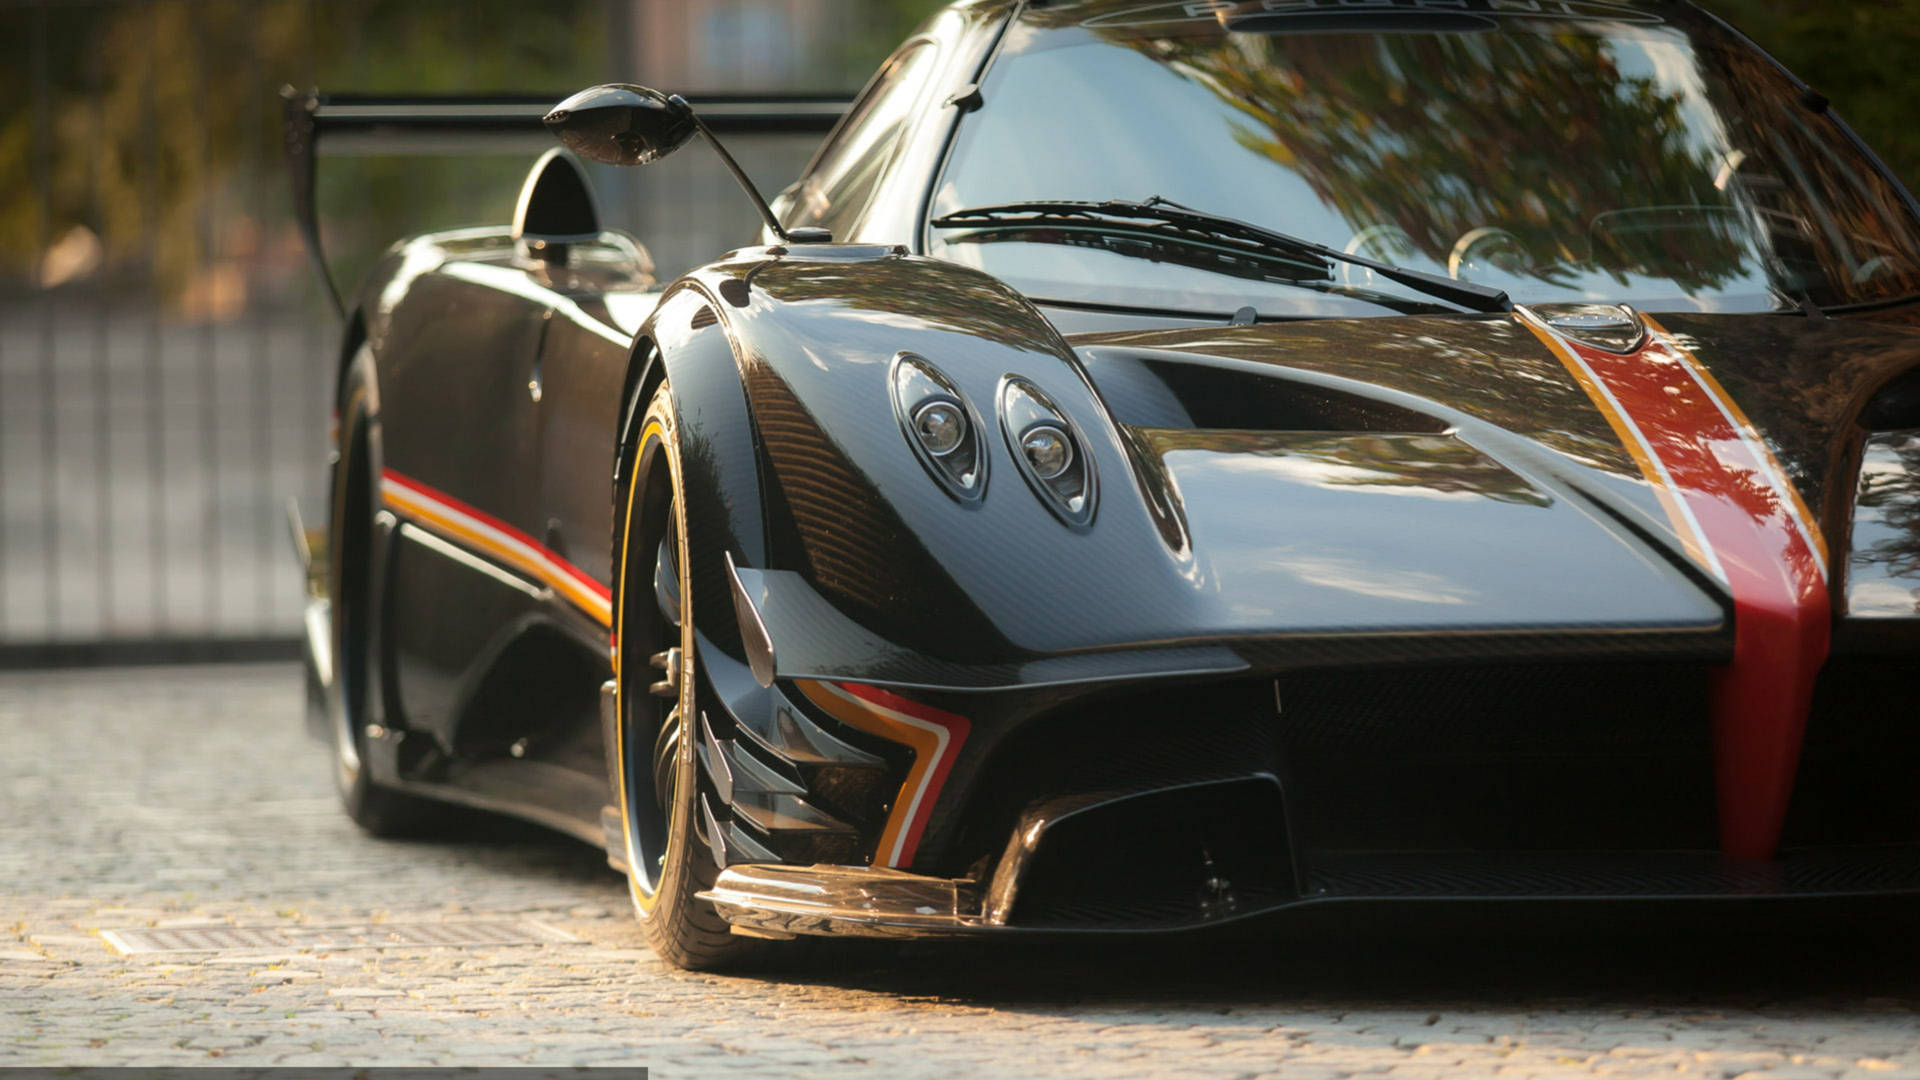 An Exhilarating Ride In The Luxurious Angle Of The Pagani Huayra. Background